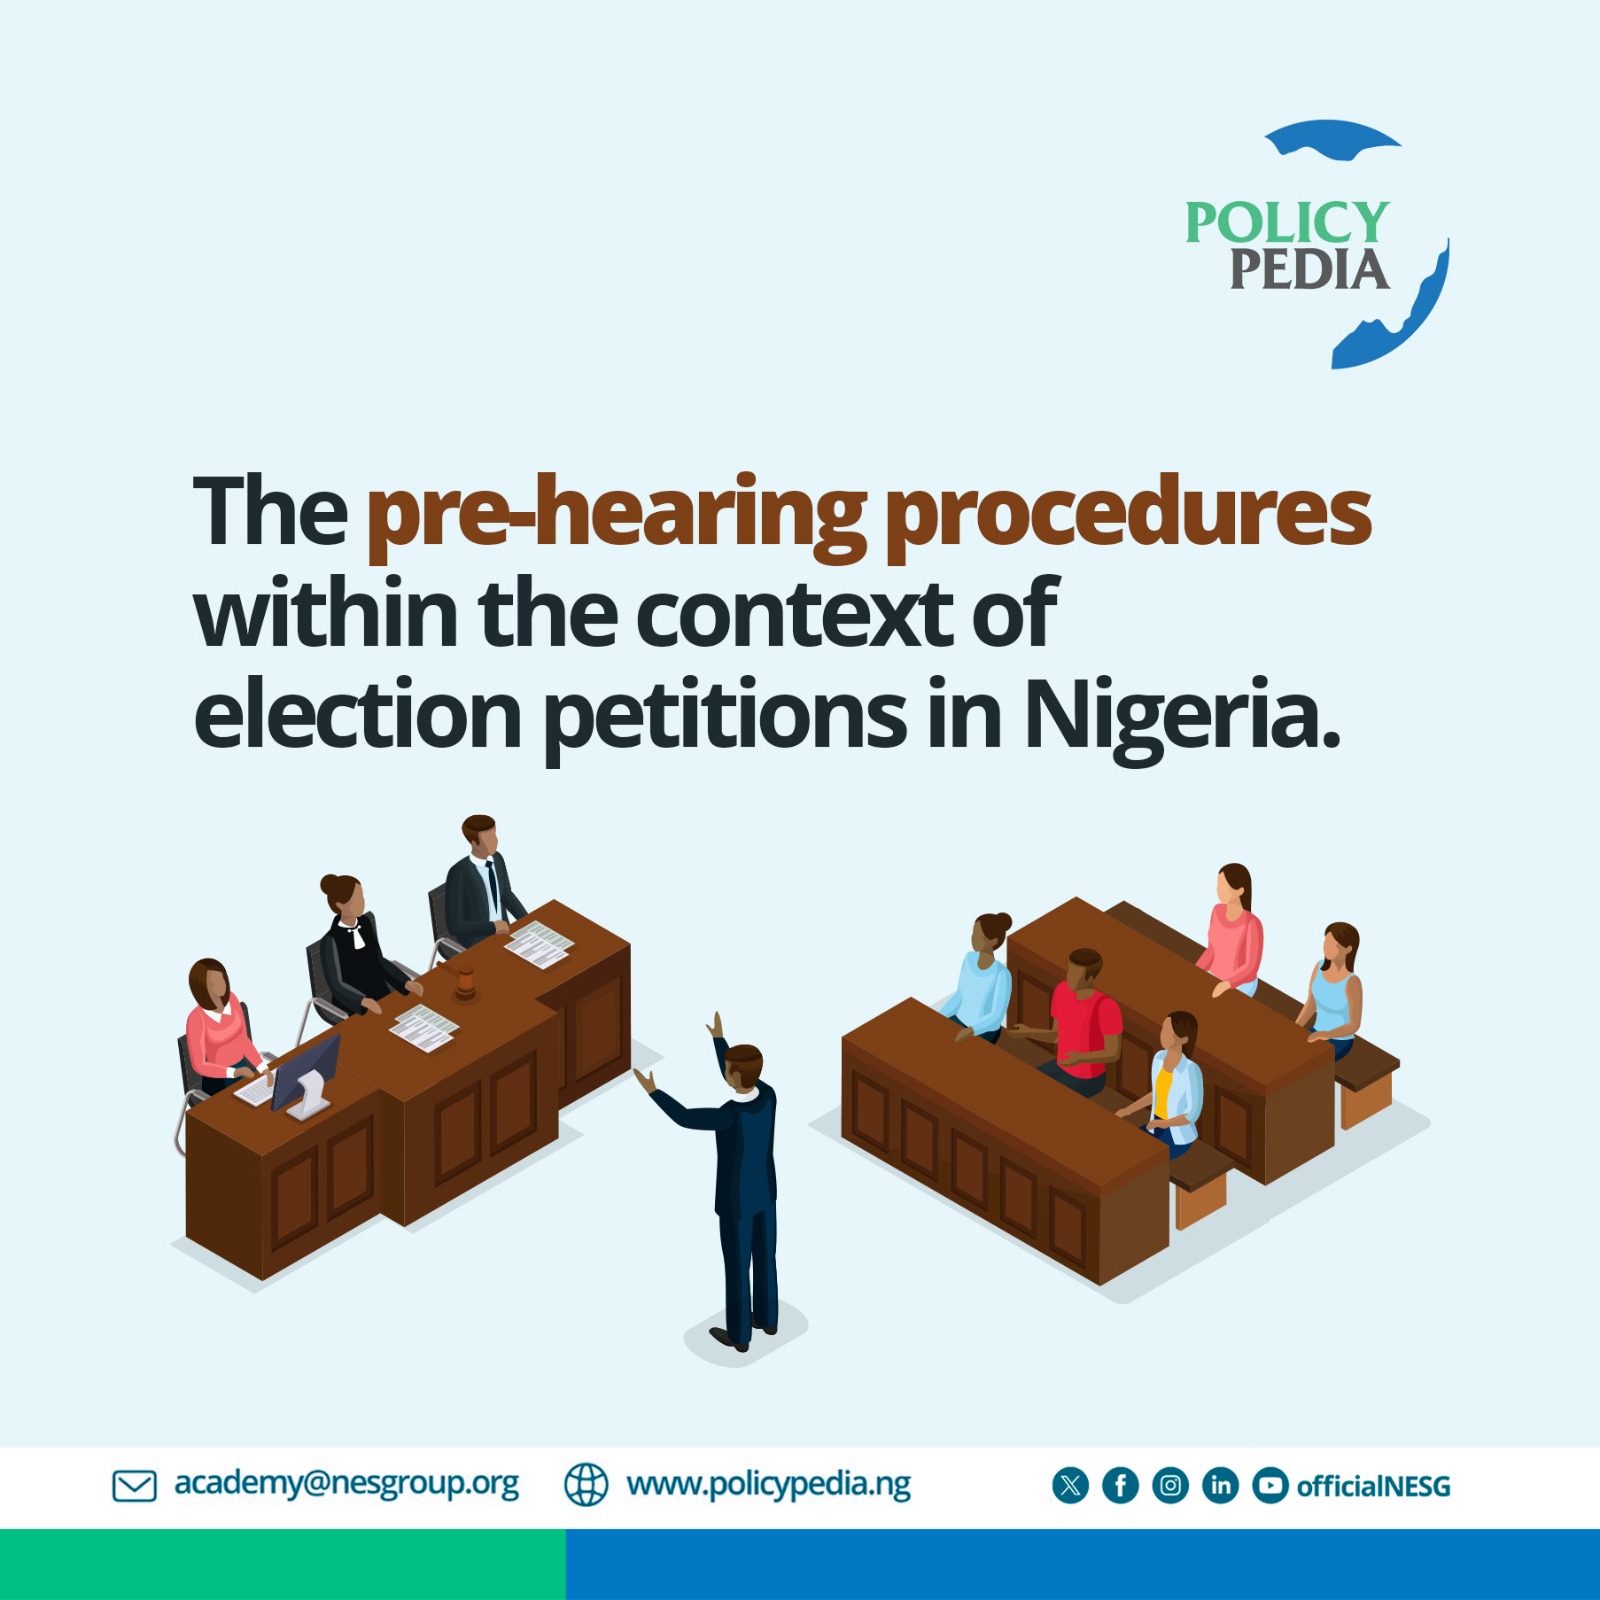 The pre-hearing procedures within the context of election petitions in Nigeria